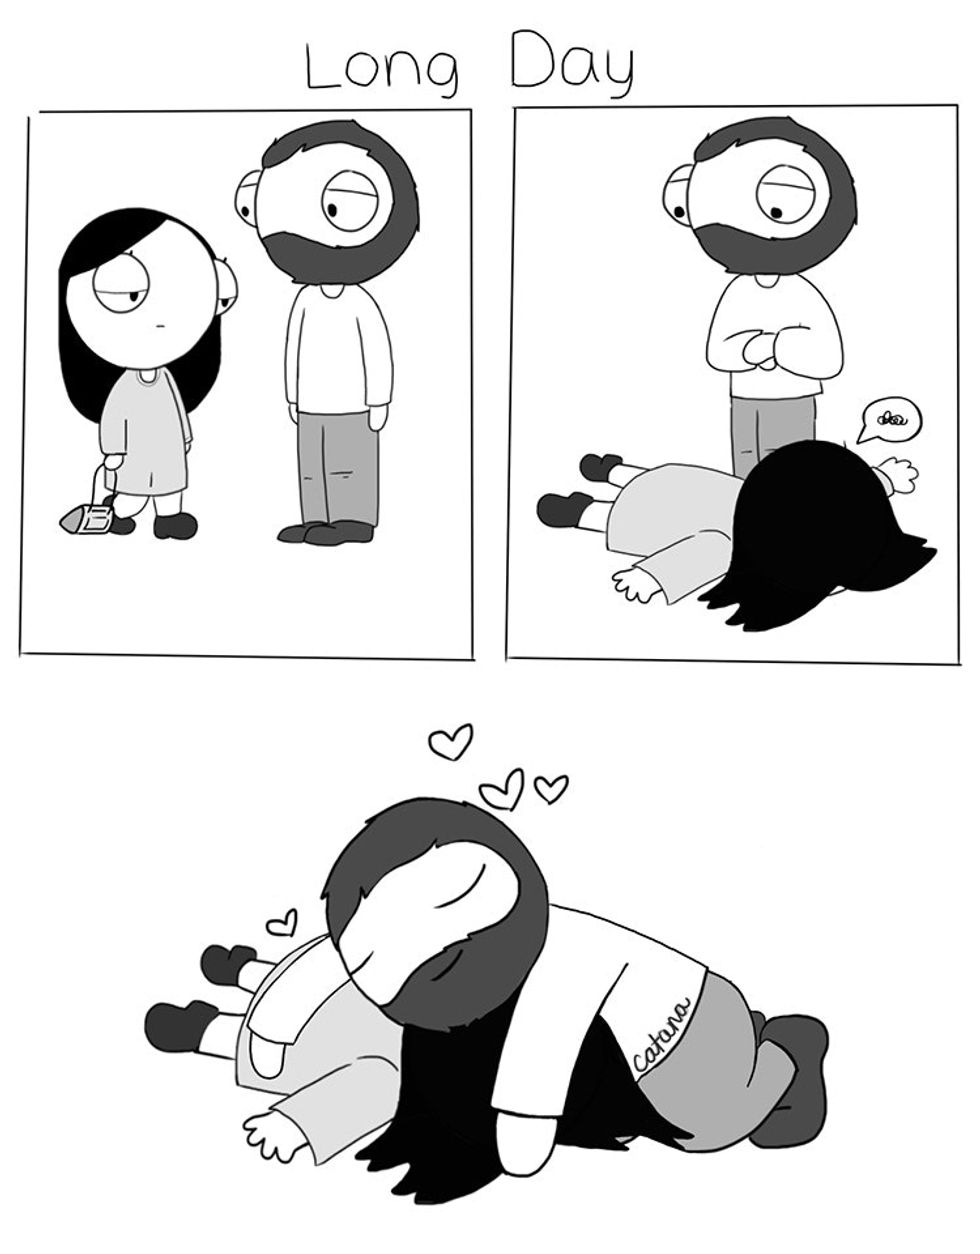 Her boyfriend asked her to draw a comic about their relationship ...